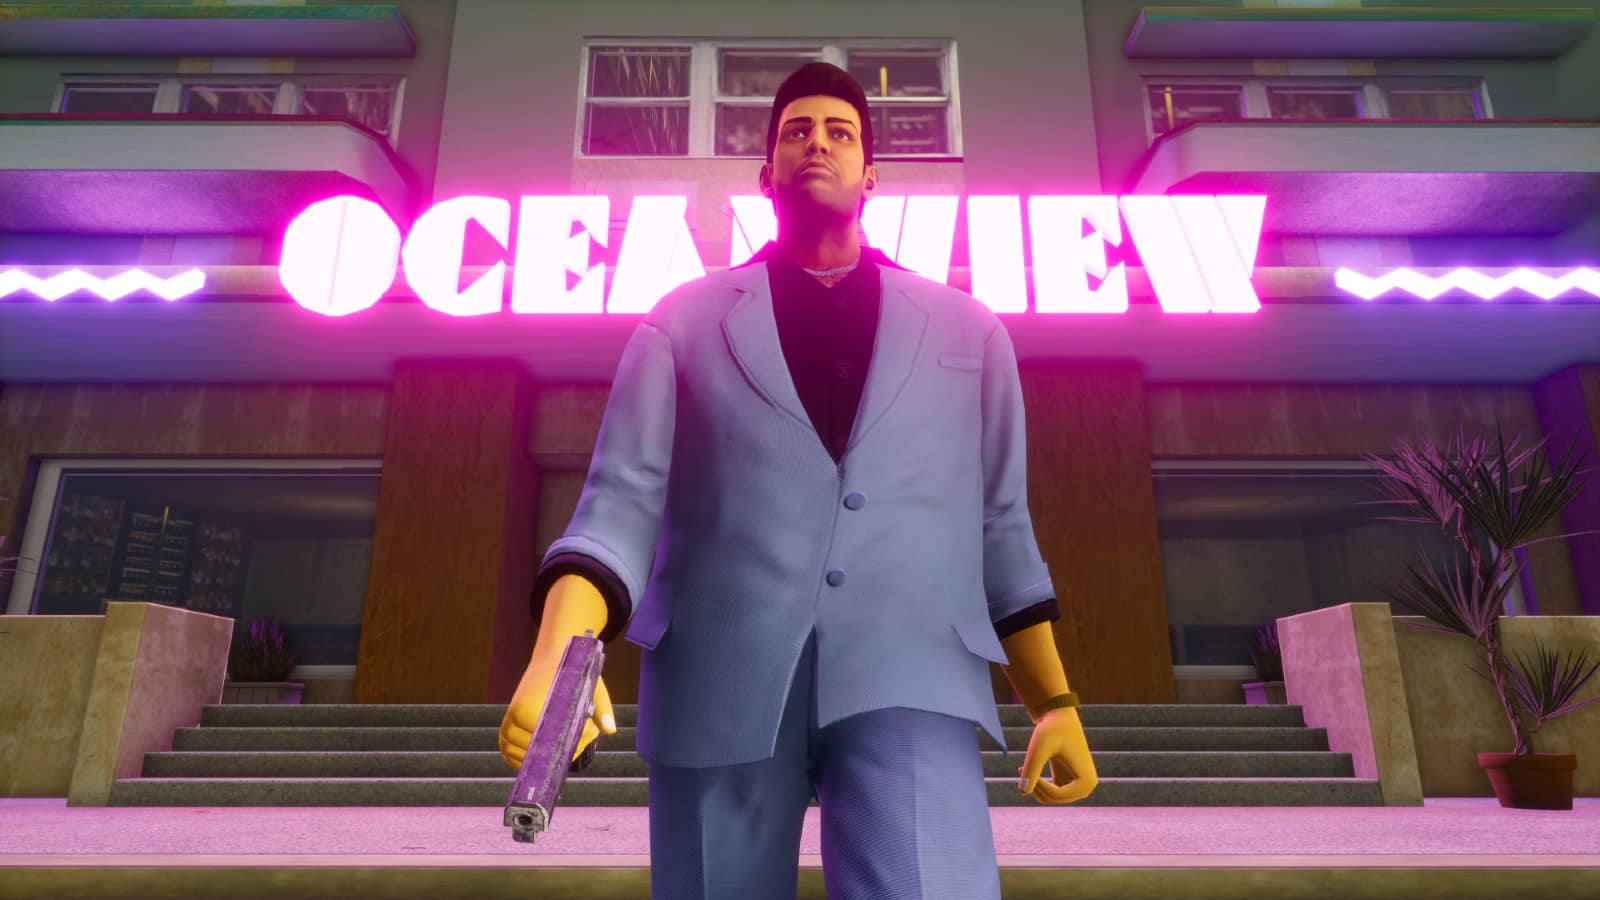 GTA 6 LEAKED MAPVice City Location, Multiple Islands, BIGGEST